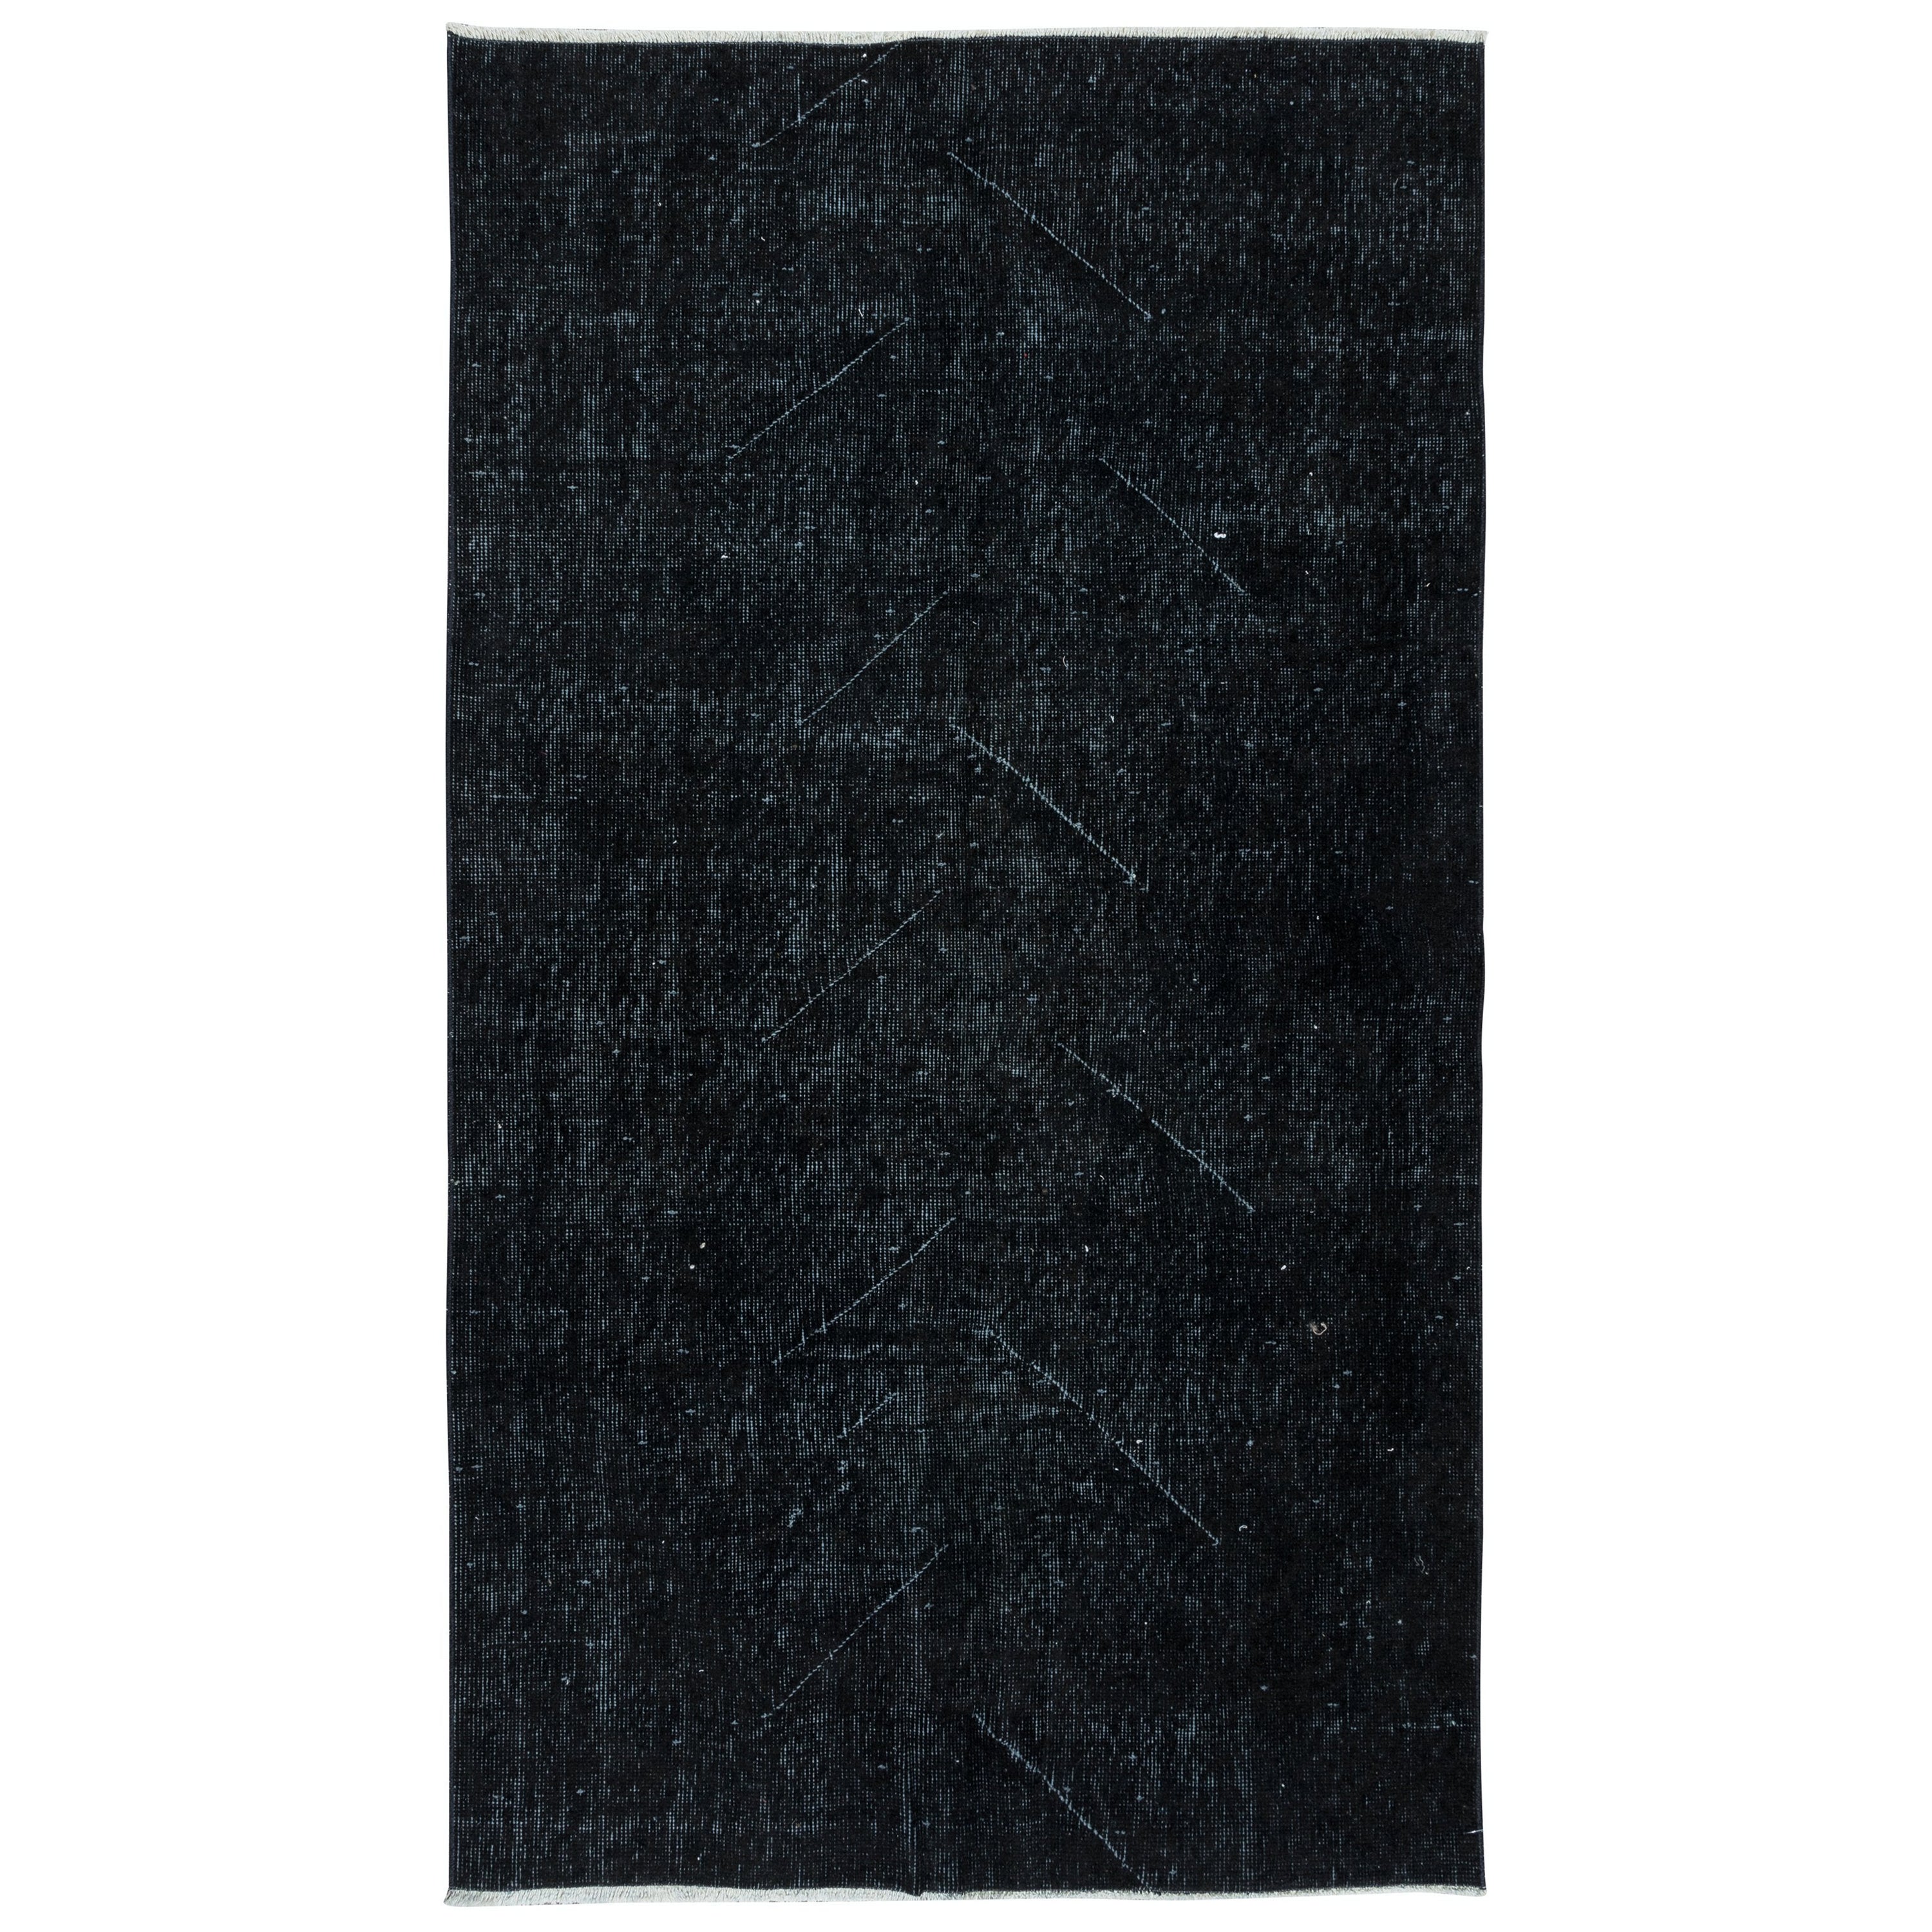 4x6.8 Ft Handmade Turkish Black Accent Rug, Ideal for Contemporary Interiors